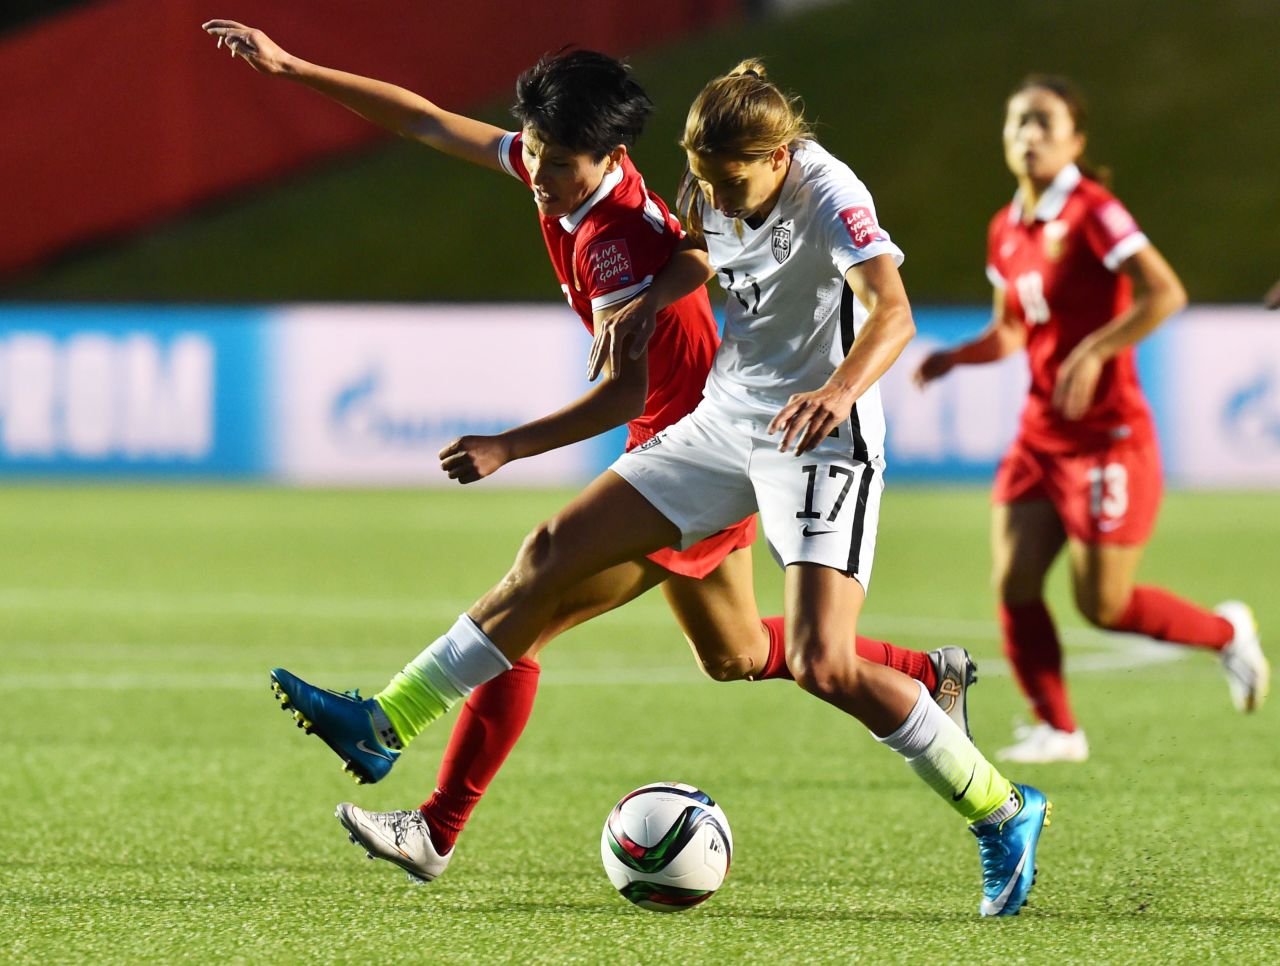 U.S. midfielder Tobin Heath fights for the ball with China's Pang Fengyue.